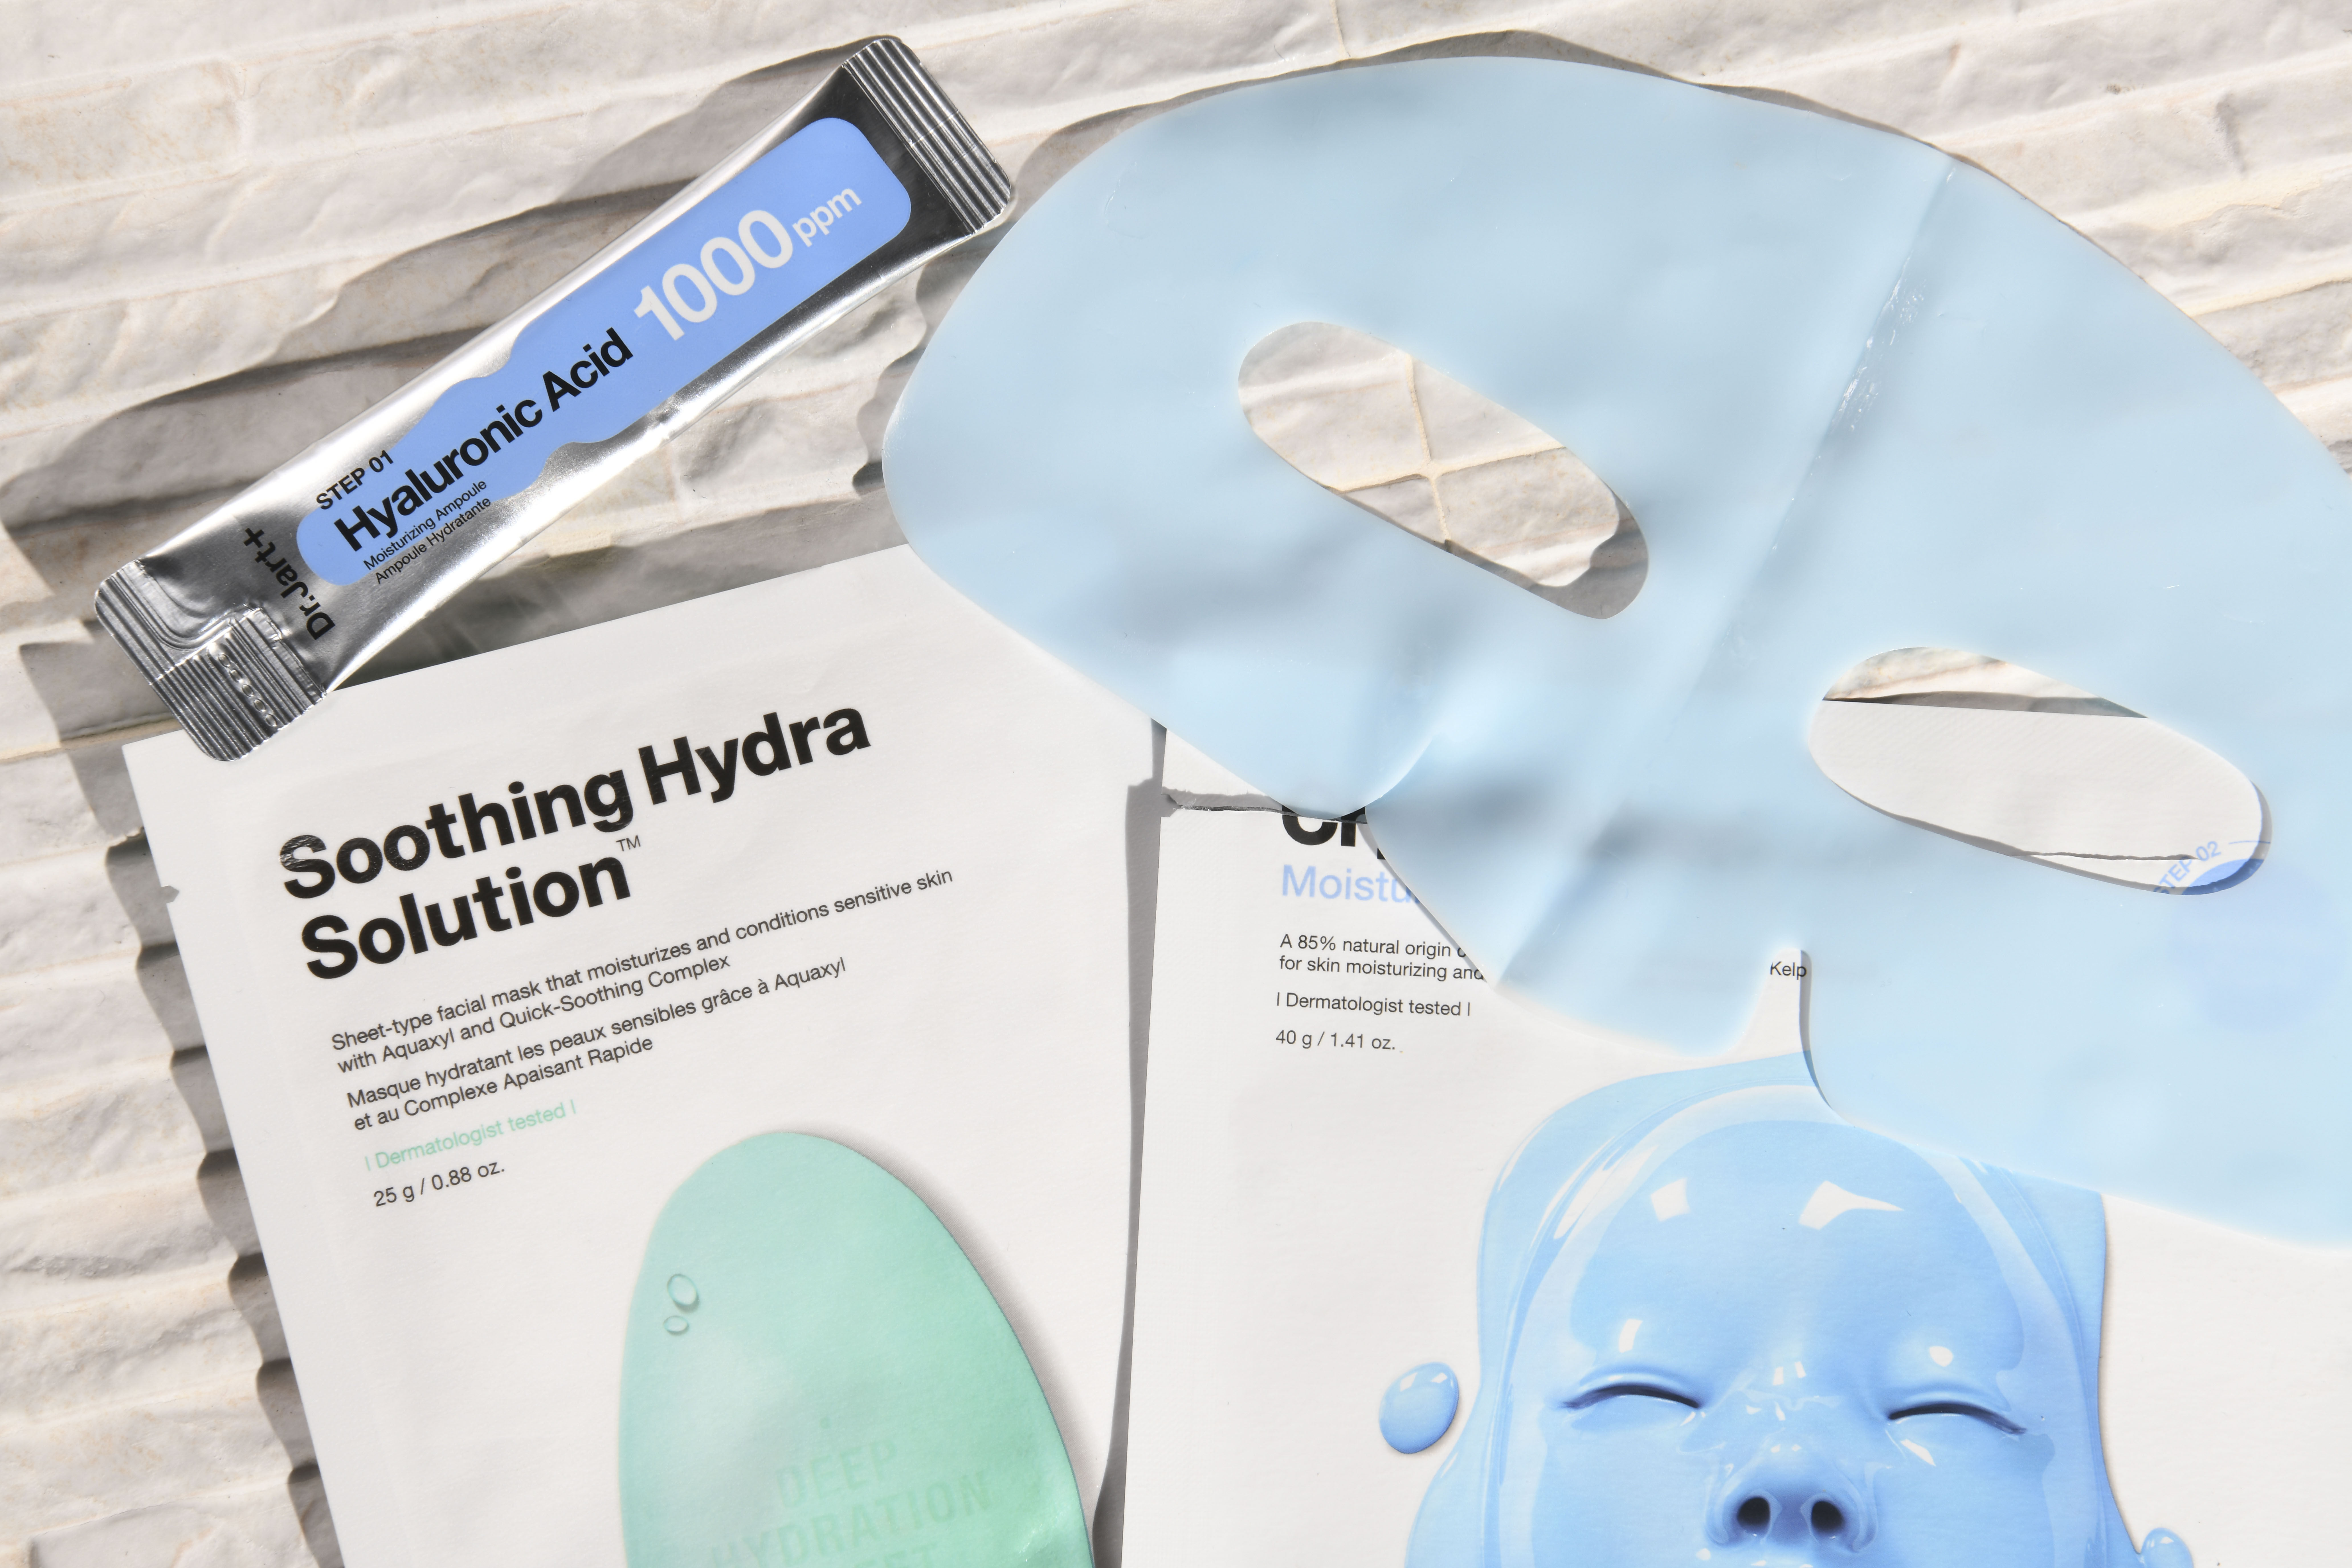 The Best Dr. Jart+ Mask For Your Skin